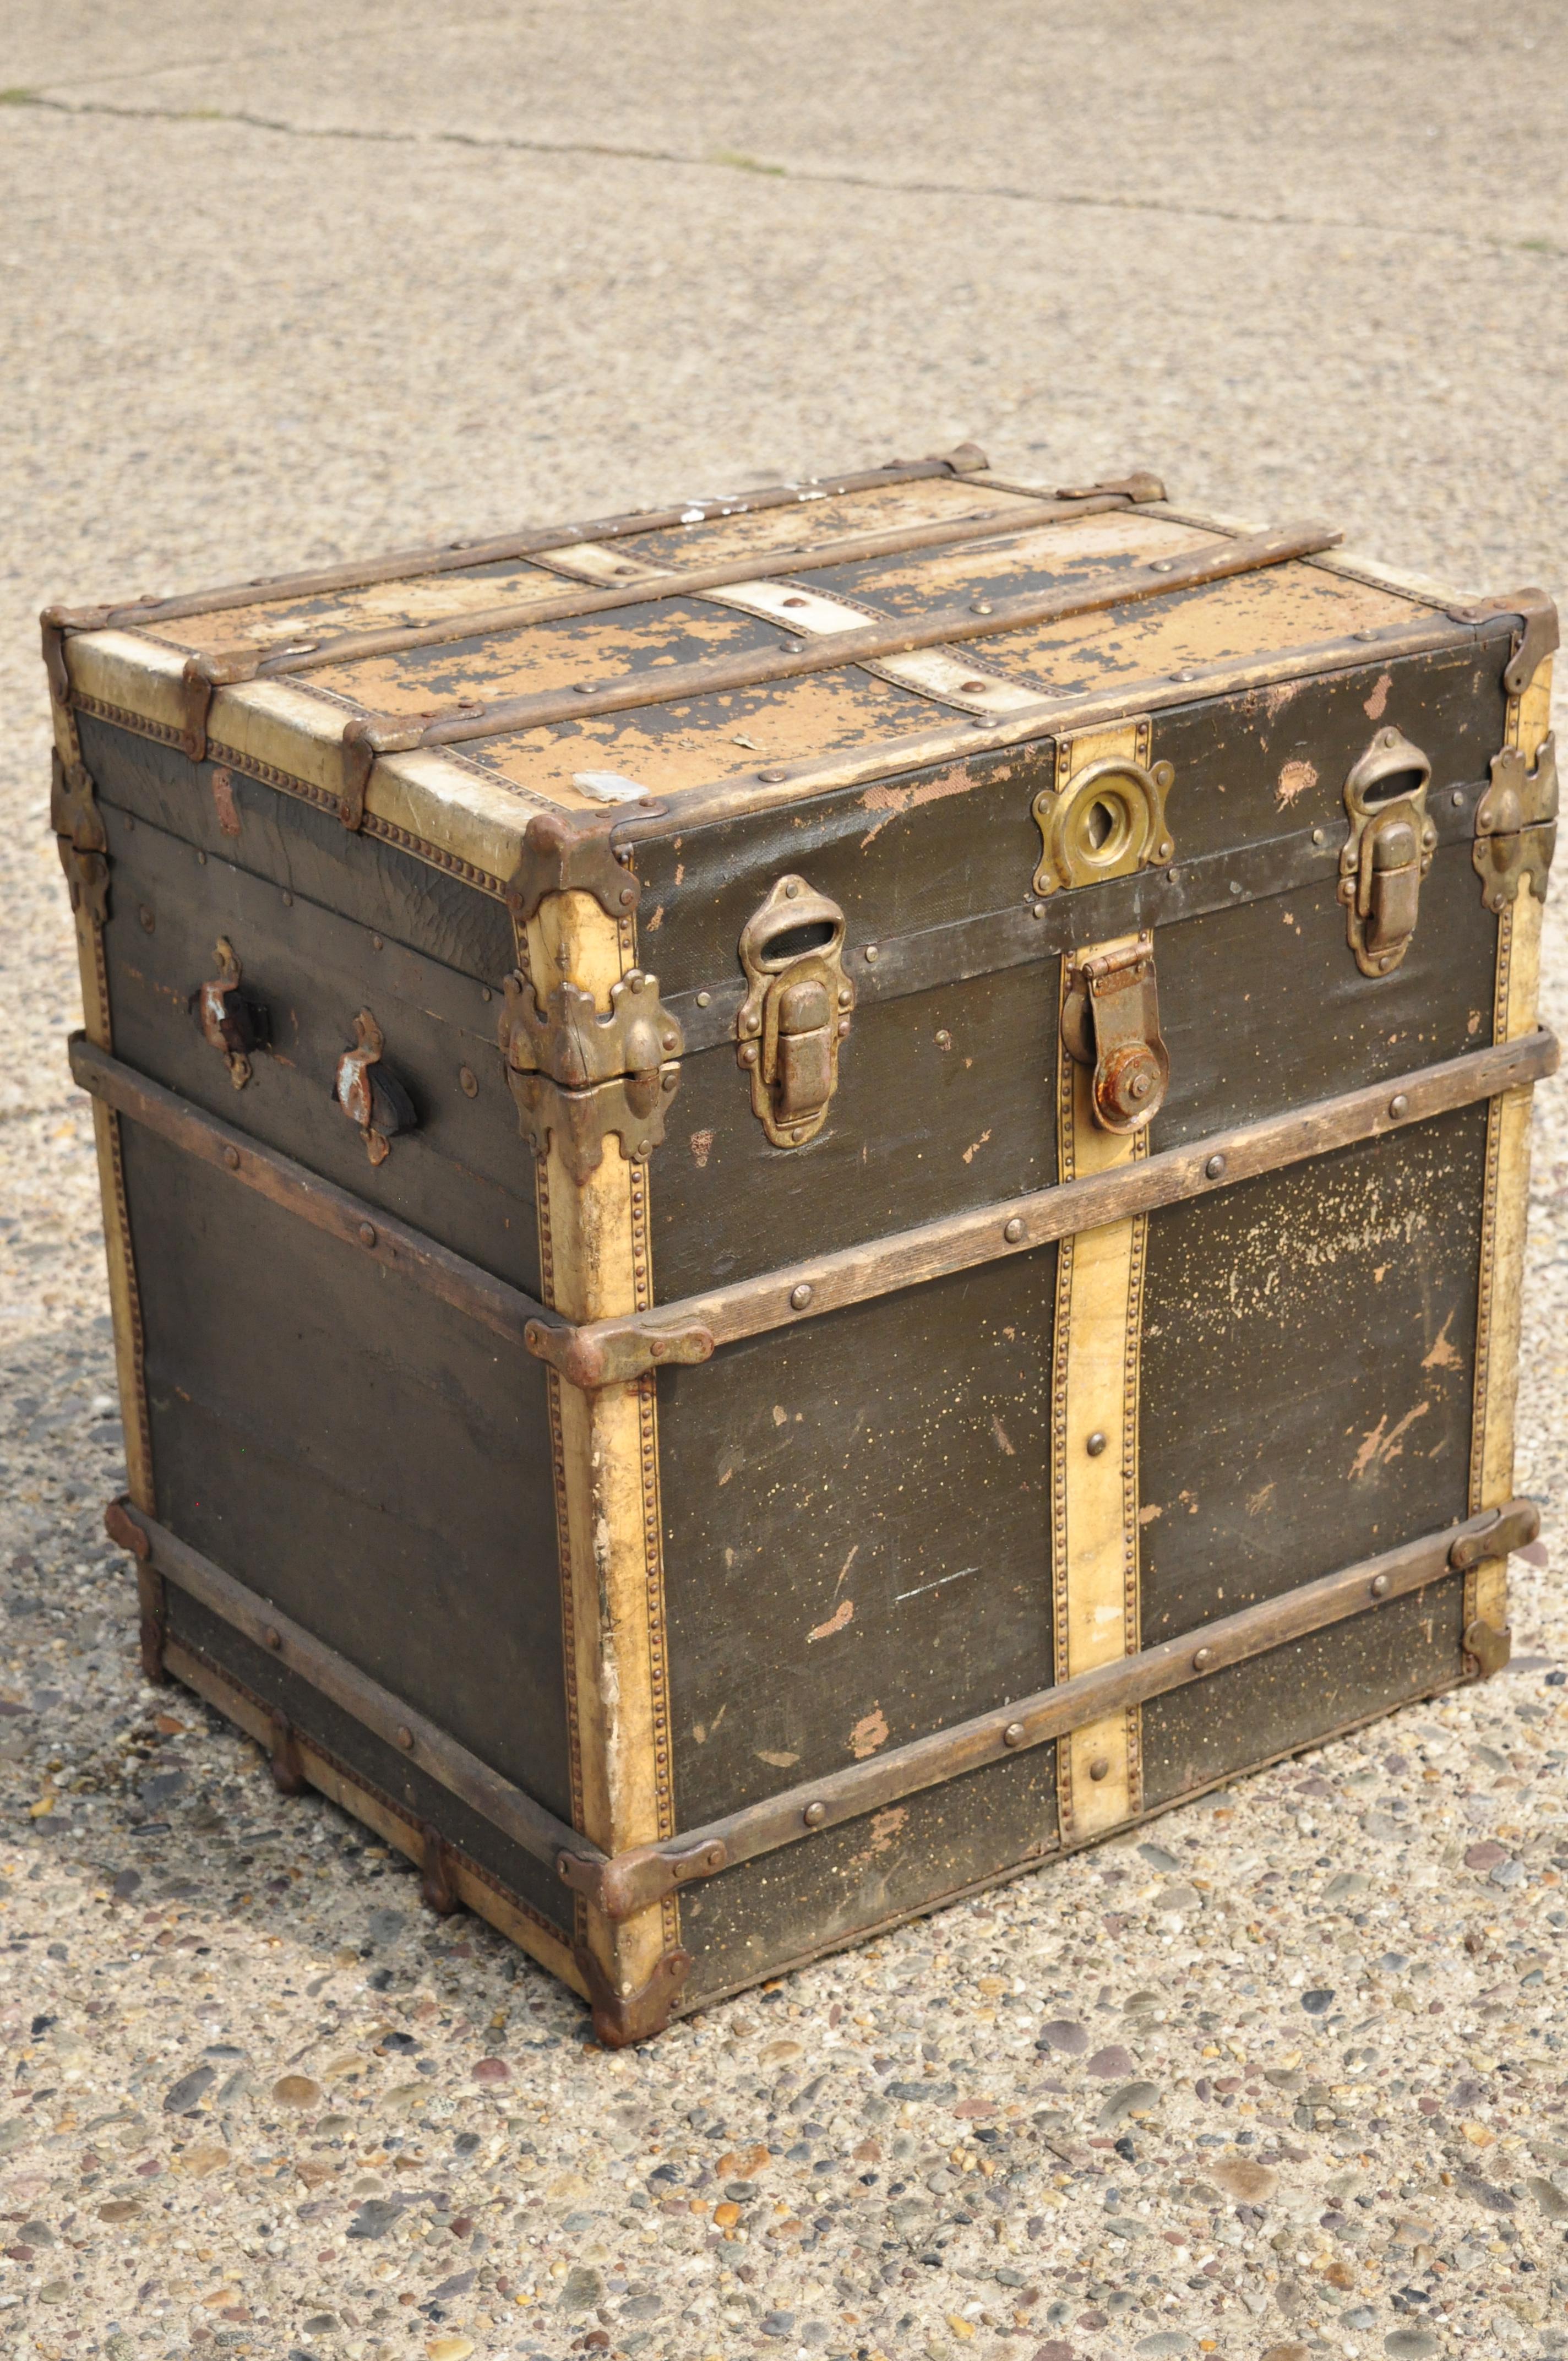 Antique Arts & Crafts Mission Victorian storage trunk chest with distressed finish. Item features a distressed finish, no key, but unlocked, very nice antique item, circa early 1900s. Measurements: 27